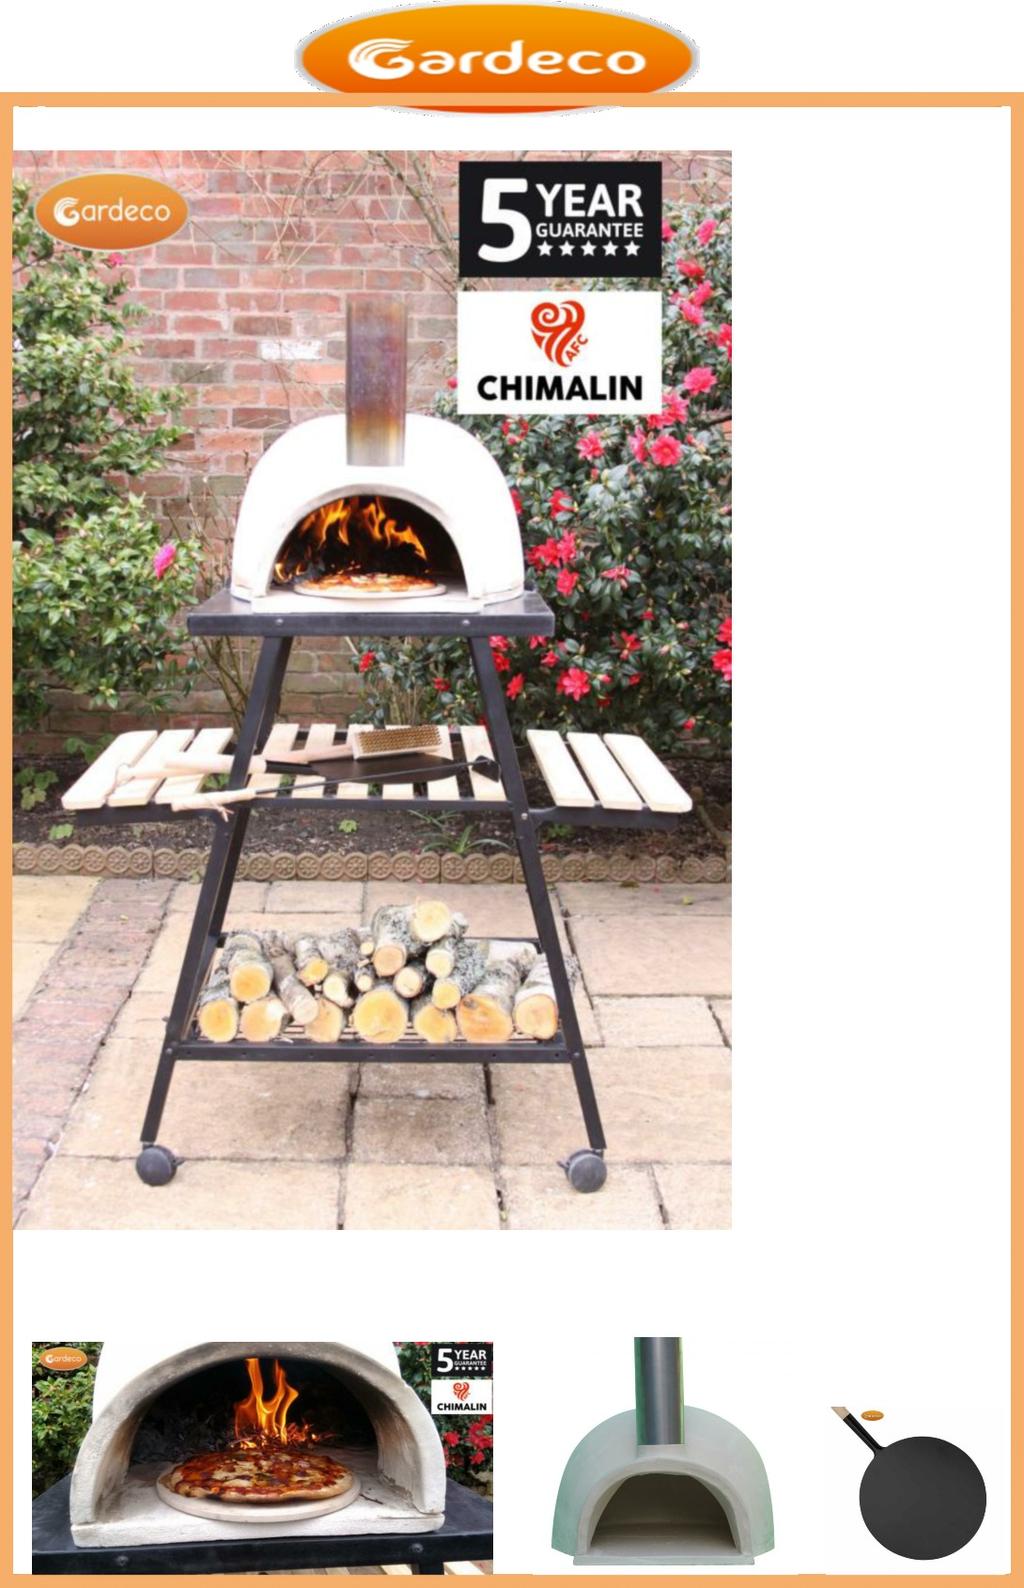 PIZZARO & STAND PIZZA OVEN 599.99 Features: Traditional design pizza oven with dome and front funnel Made of CHIMALIN AFC.